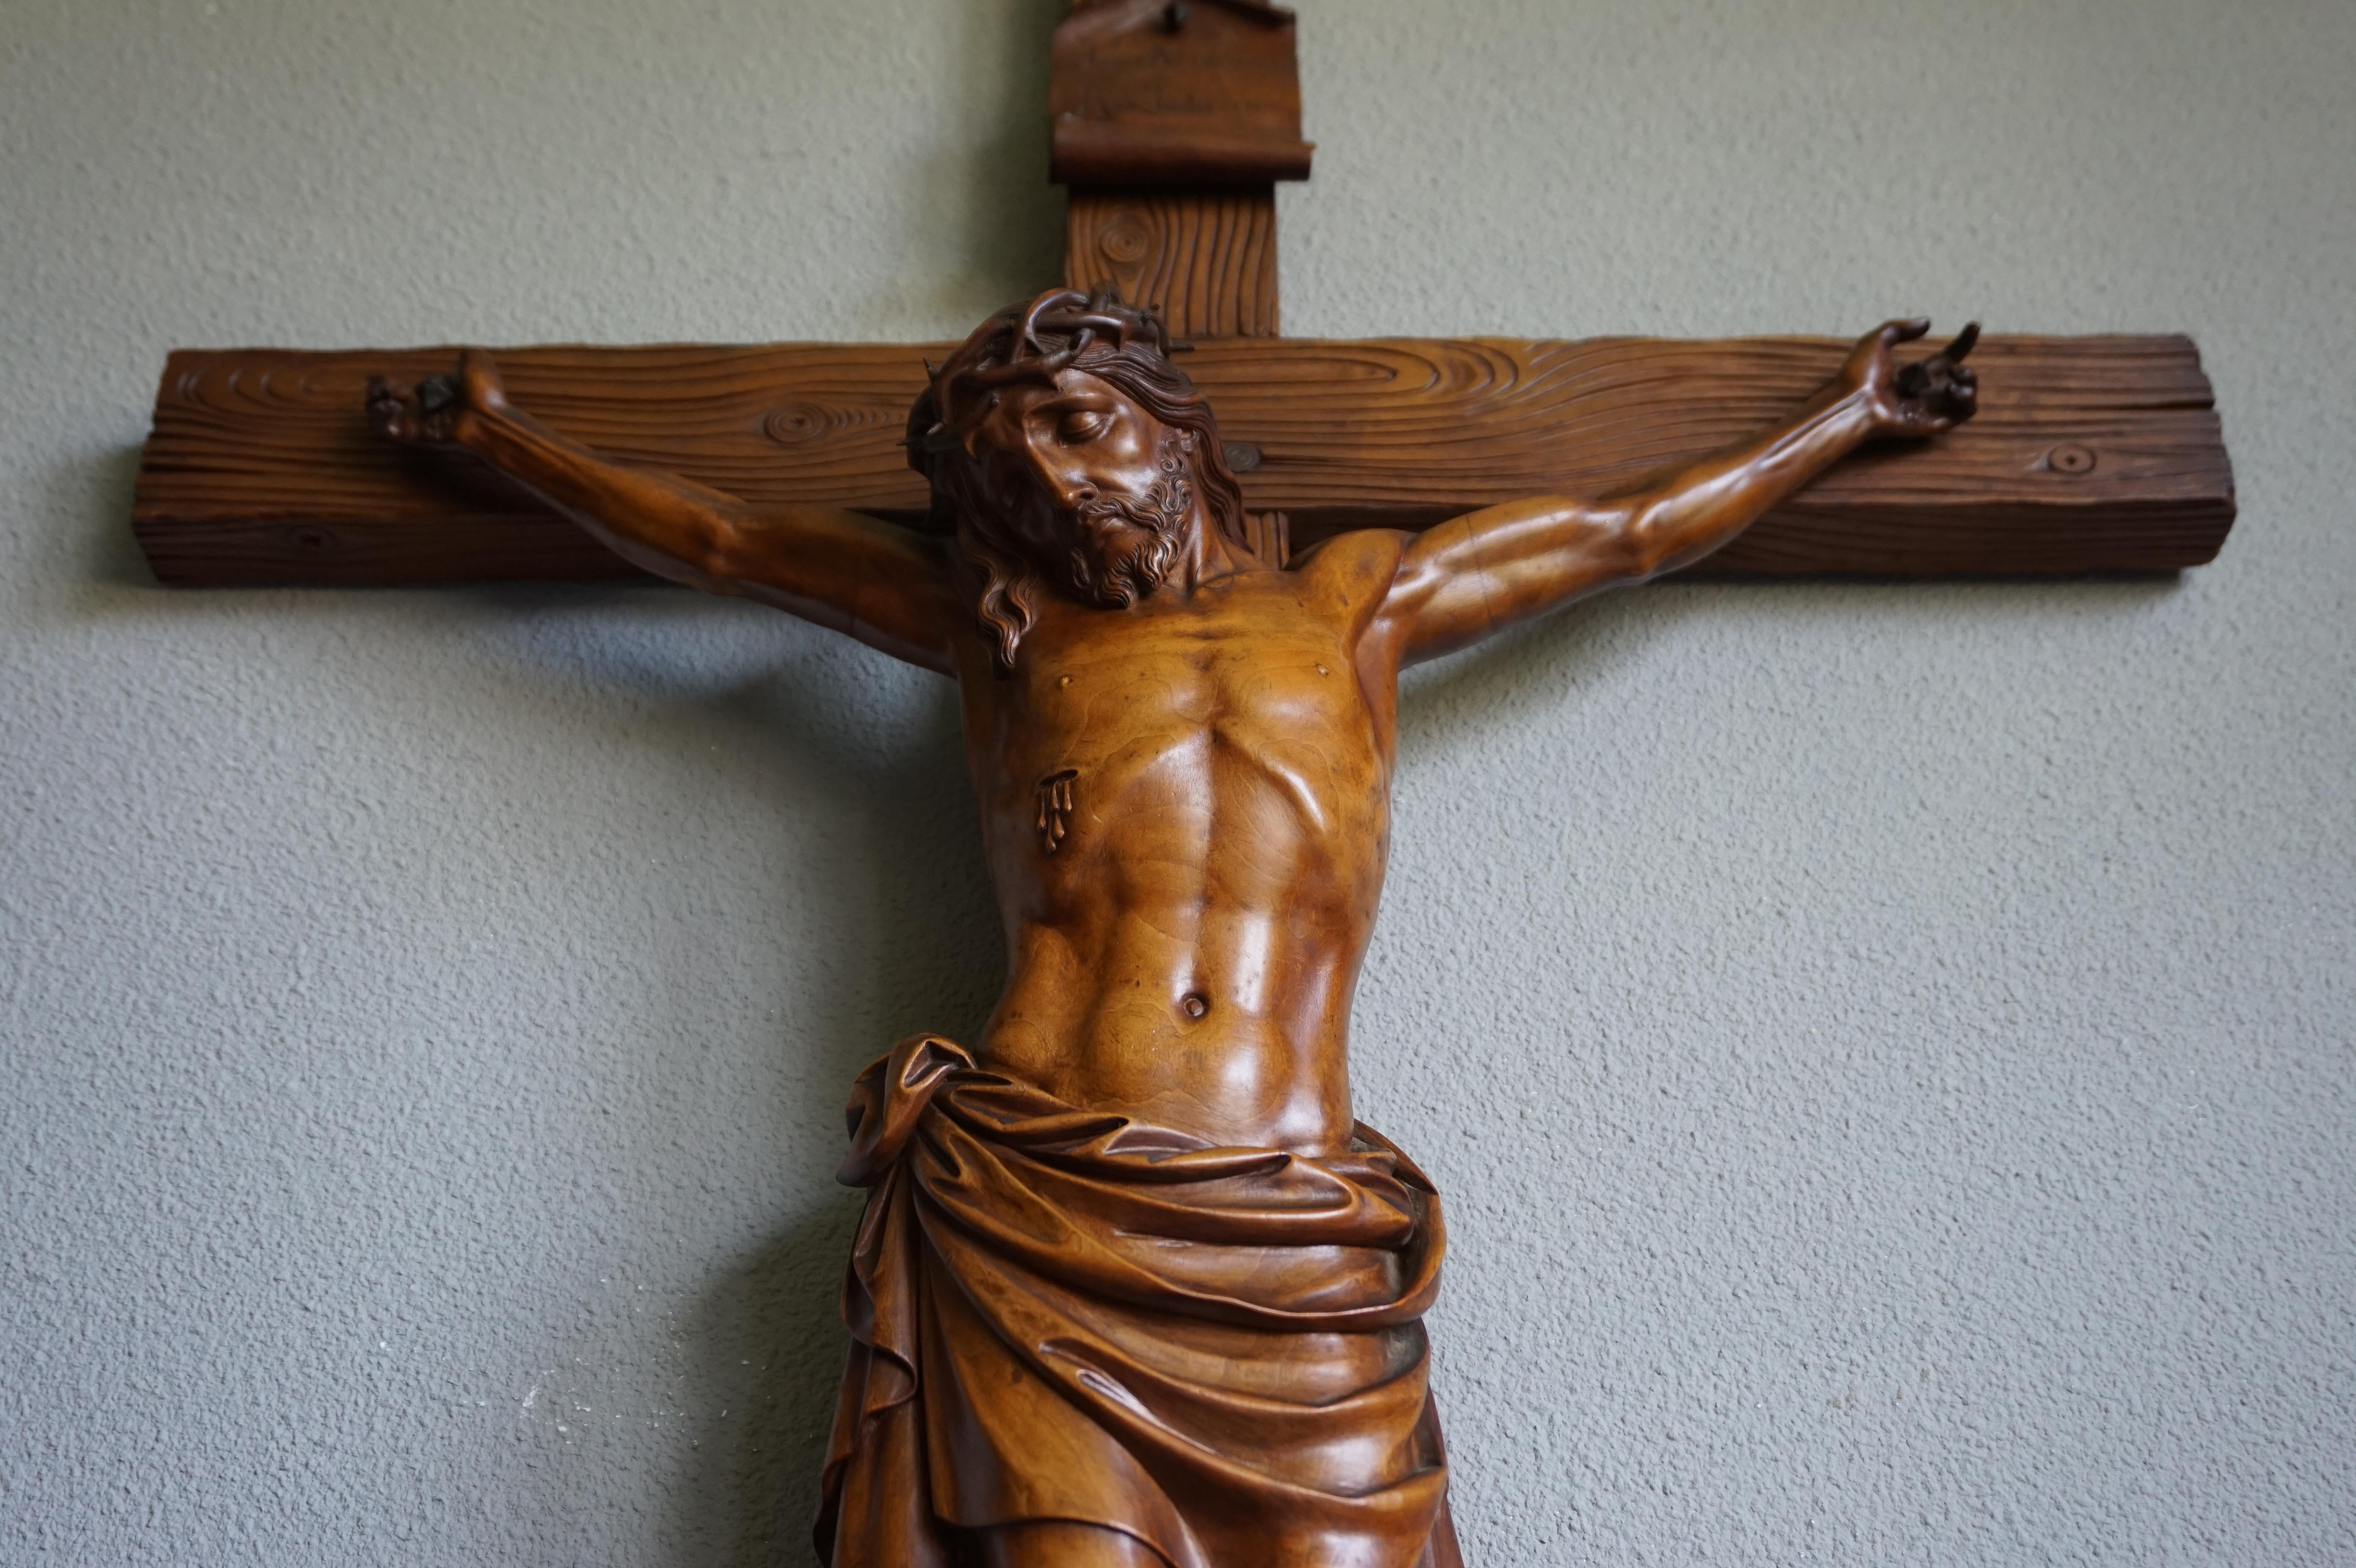 Large and top quality carved crucifix with Latin text 'Jezus Nazarenus, Rex Judaeorum'.

In the course of the past twelve months we have offered and sold a number of top-quality crafted church relics that were part of an extensive private